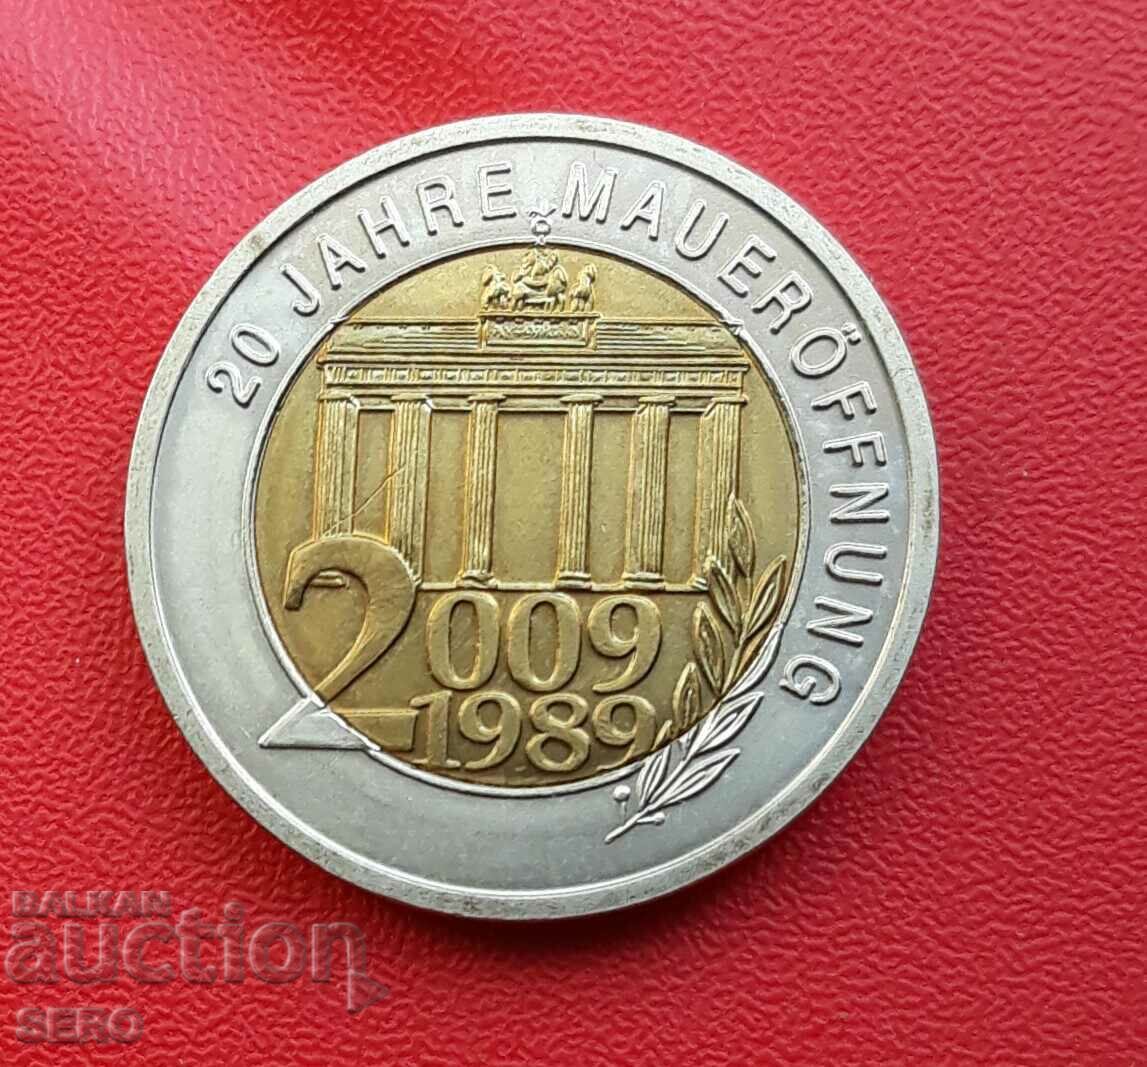 Germany-Medal 2009-20 from the fall of the Berlin Wall